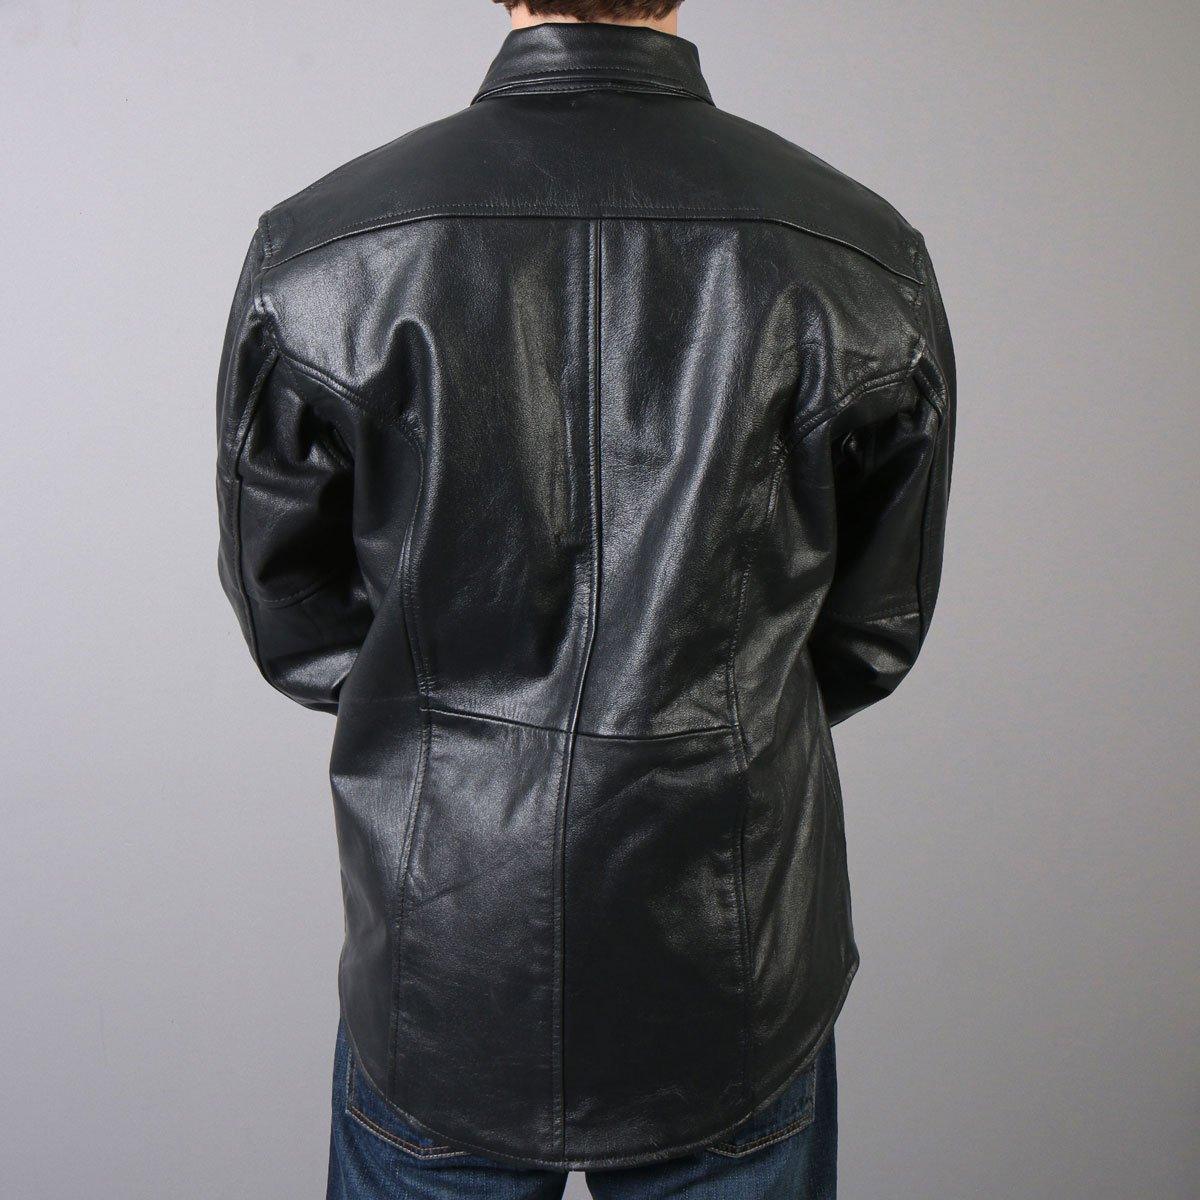 Hot Leathers Men's Leather Shirt - American Legend Rider